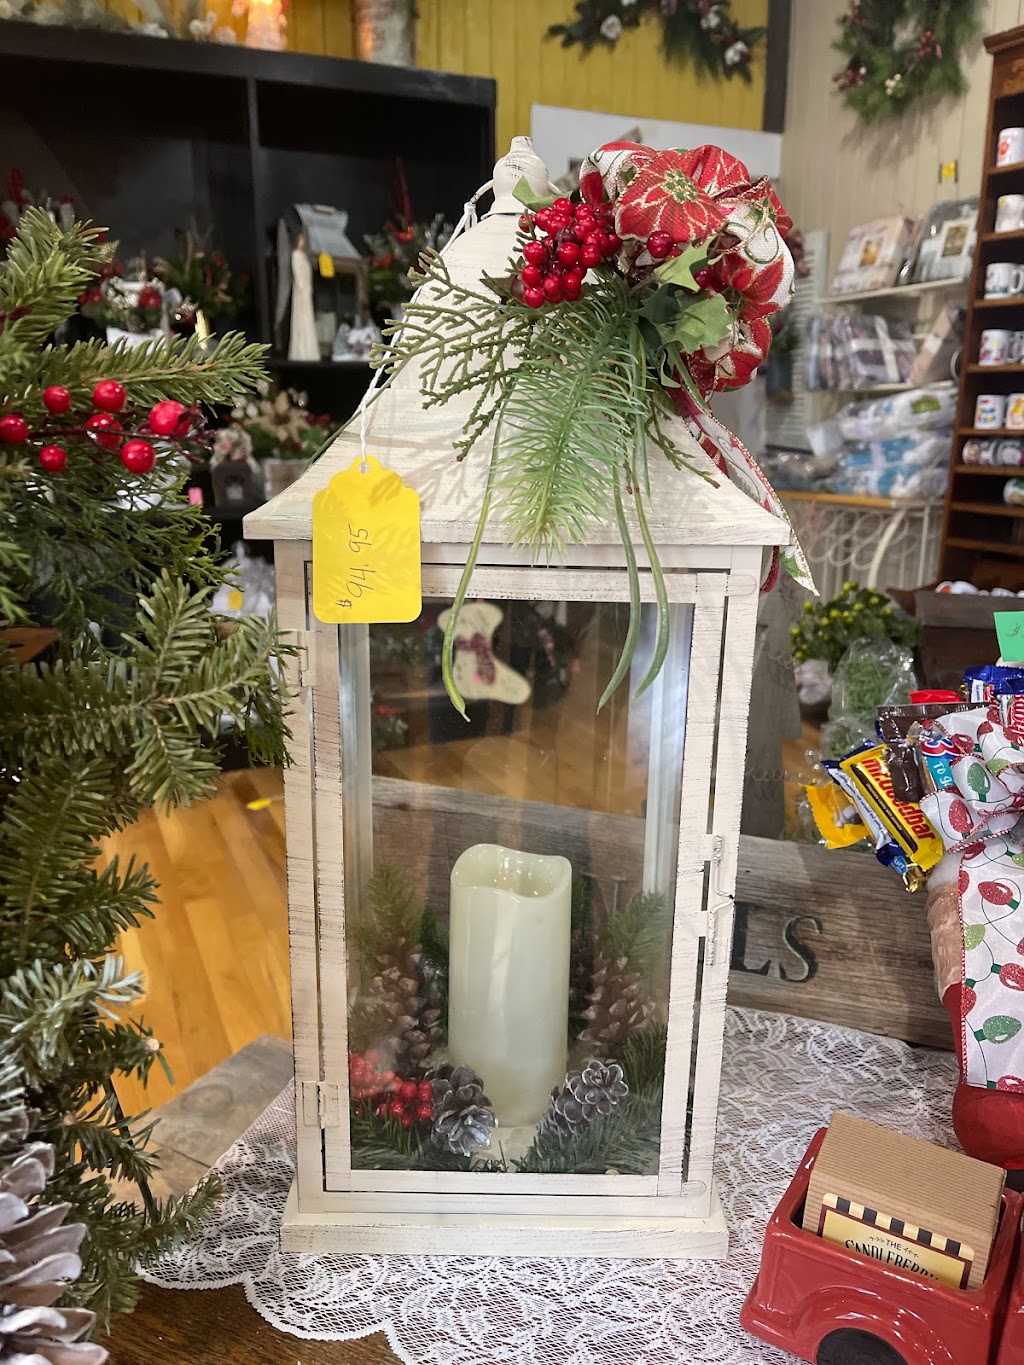 Jessicas Attic Floral | 219 N Market St, Waverly, OH 45690 | Phone: (740) 947-7054